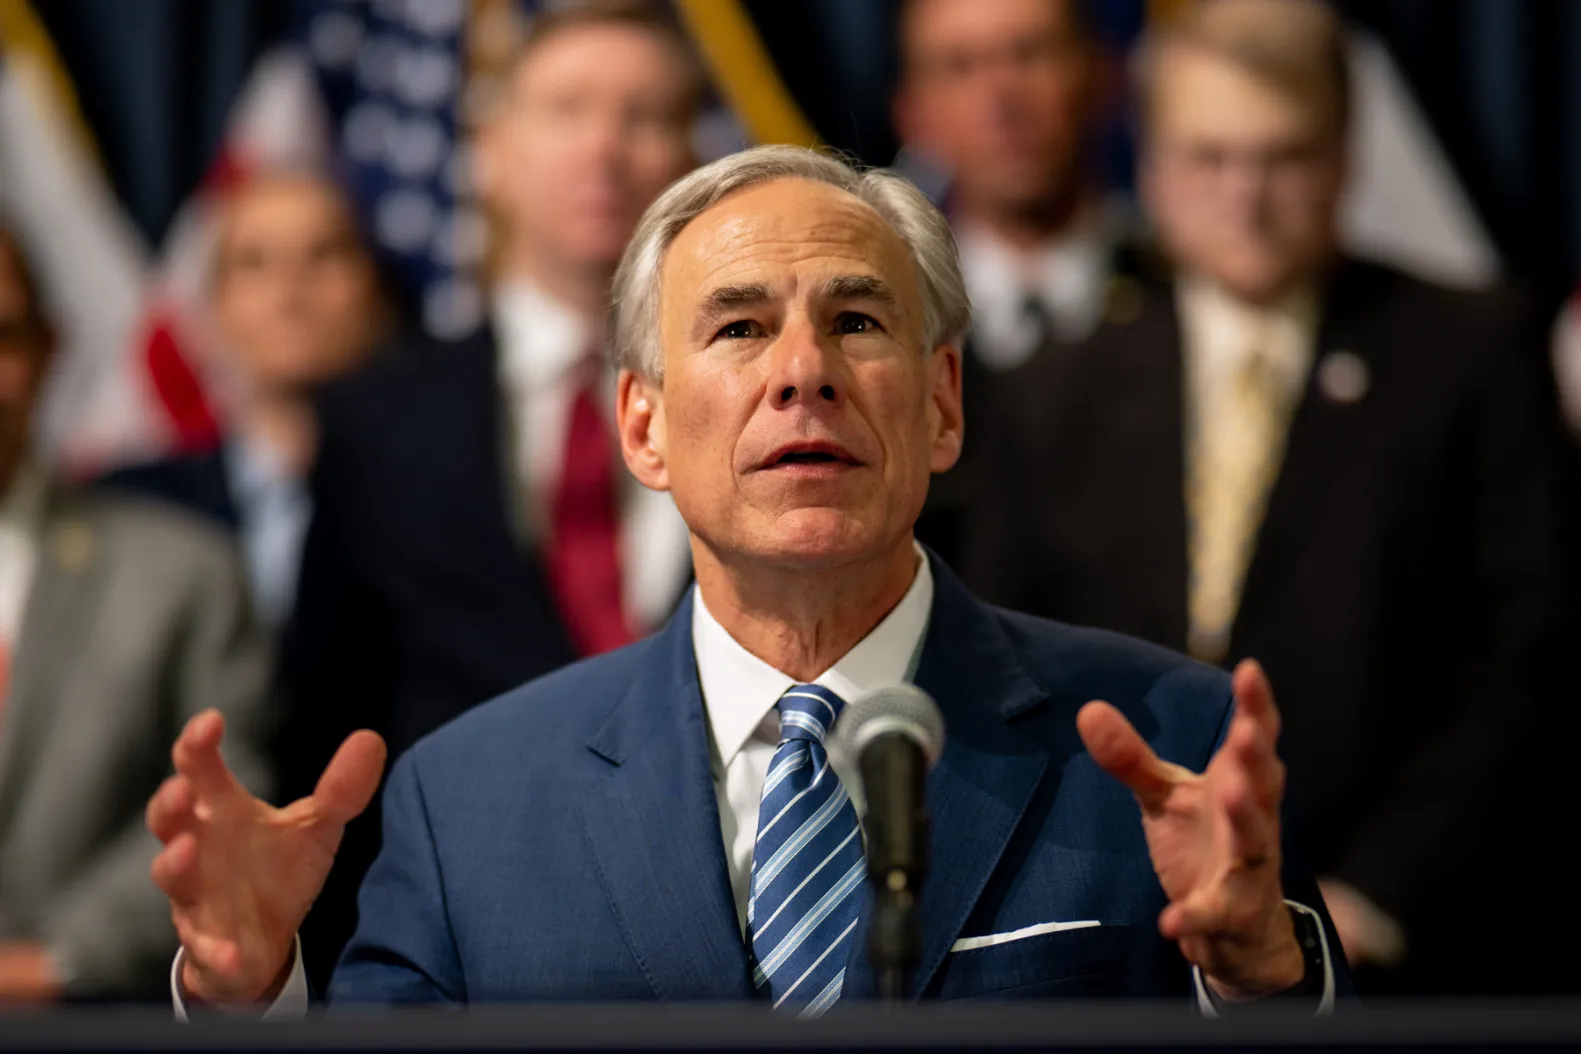 Texas Governor Greg Abbott is openly challenging a U.S. Supreme Court directive. This is deeply concerning.